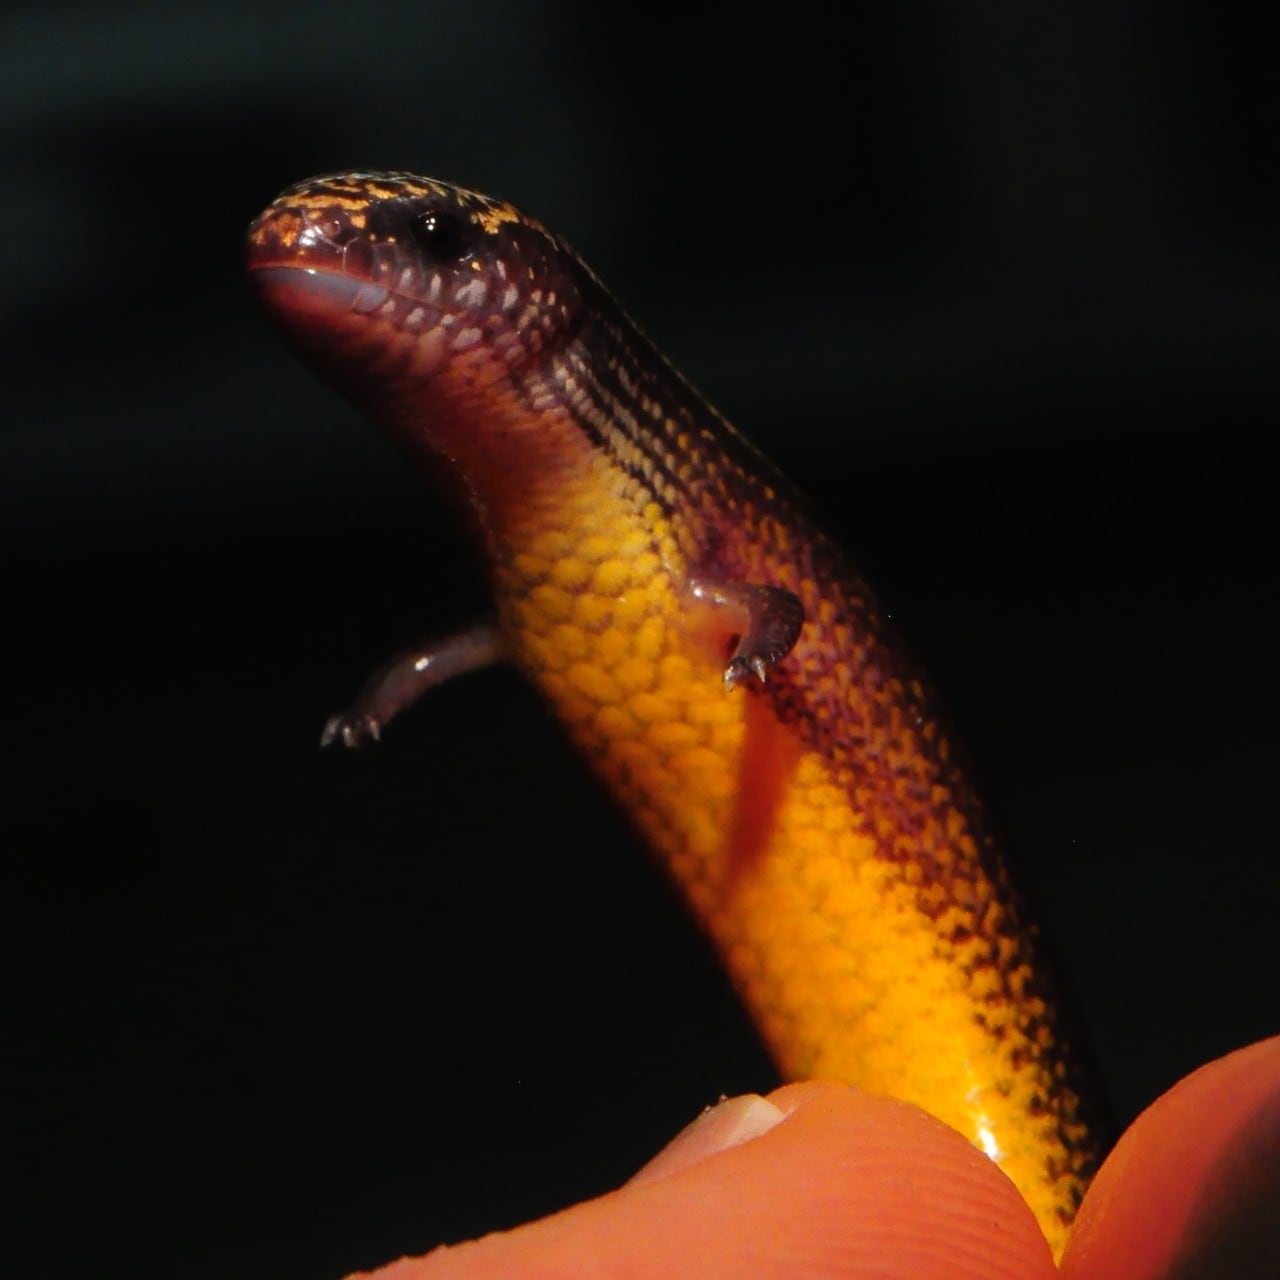 'One of the weirdest lizards': an adult three-toed skink.